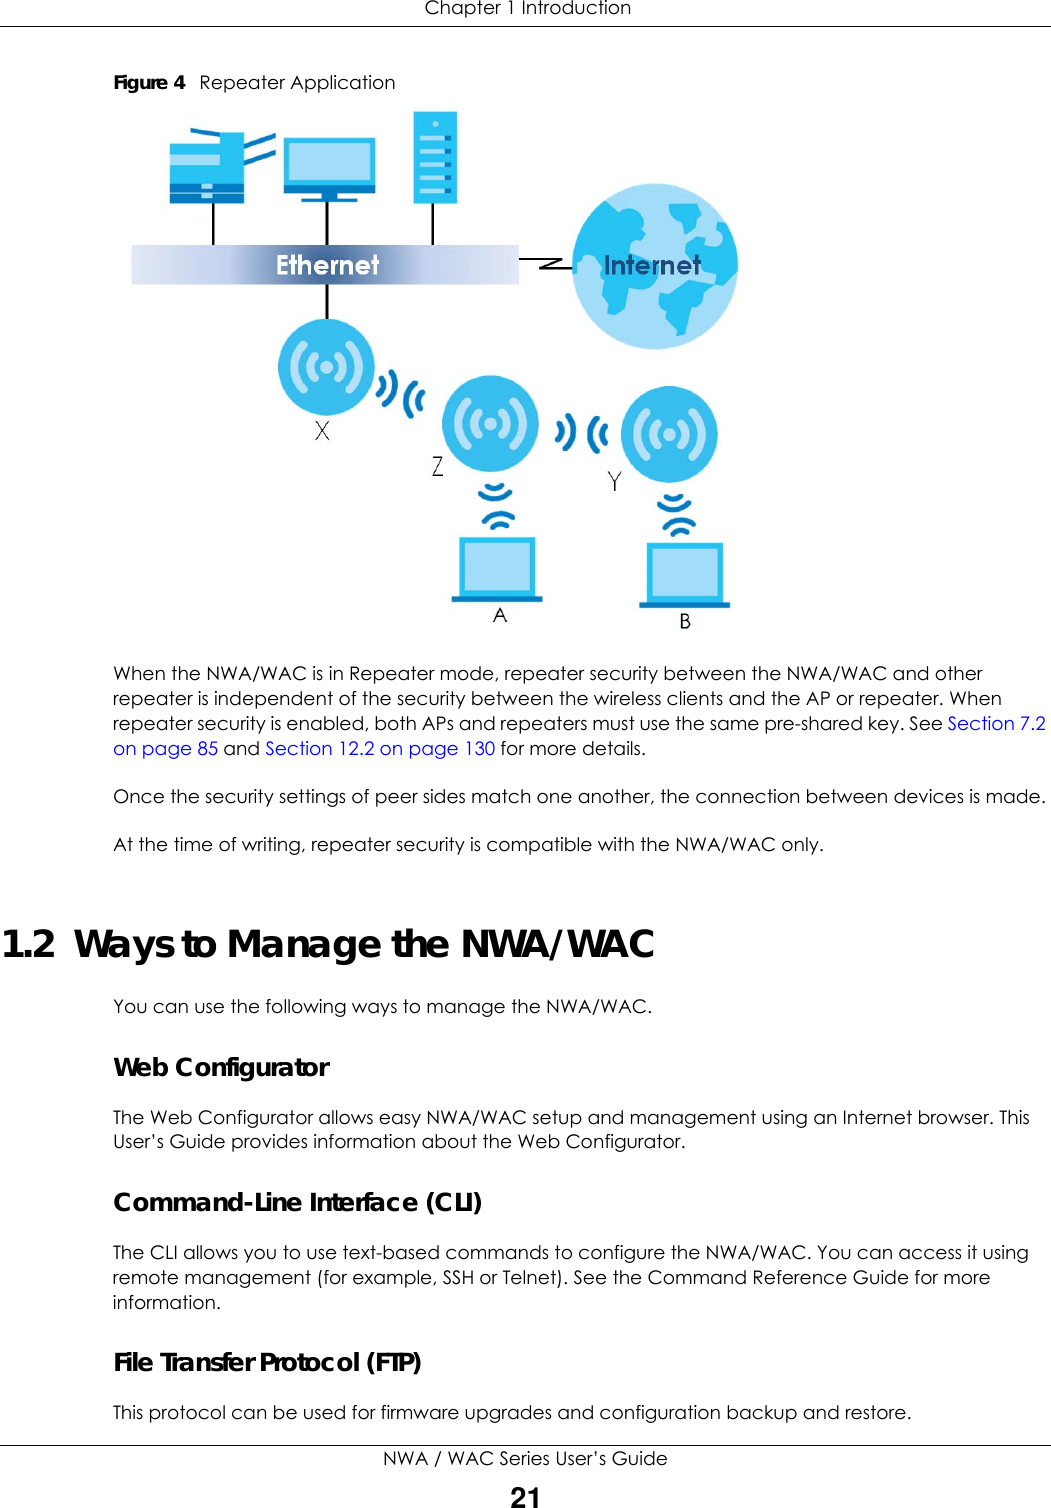  Chapter 1 IntroductionNWA / WAC Series User’s Guide21Figure 4   Repeater ApplicationWhen the NWA/WAC is in Repeater mode, repeater security between the NWA/WAC and other repeater is independent of the security between the wireless clients and the AP or repeater. When repeater security is enabled, both APs and repeaters must use the same pre-shared key. See Section 7.2 on page 85 and Section 12.2 on page 130 for more details. Once the security settings of peer sides match one another, the connection between devices is made.At the time of writing, repeater security is compatible with the NWA/WAC only. 1.2  Ways to Manage the NWA/WACYou can use the following ways to manage the NWA/WAC.Web ConfiguratorThe Web Configurator allows easy NWA/WAC setup and management using an Internet browser. This User’s Guide provides information about the Web Configurator.Command-Line Interface (CLI)The CLI allows you to use text-based commands to configure the NWA/WAC. You can access it using remote management (for example, SSH or Telnet). See the Command Reference Guide for more information.File Transfer Protocol (FTP)This protocol can be used for firmware upgrades and configuration backup and restore.